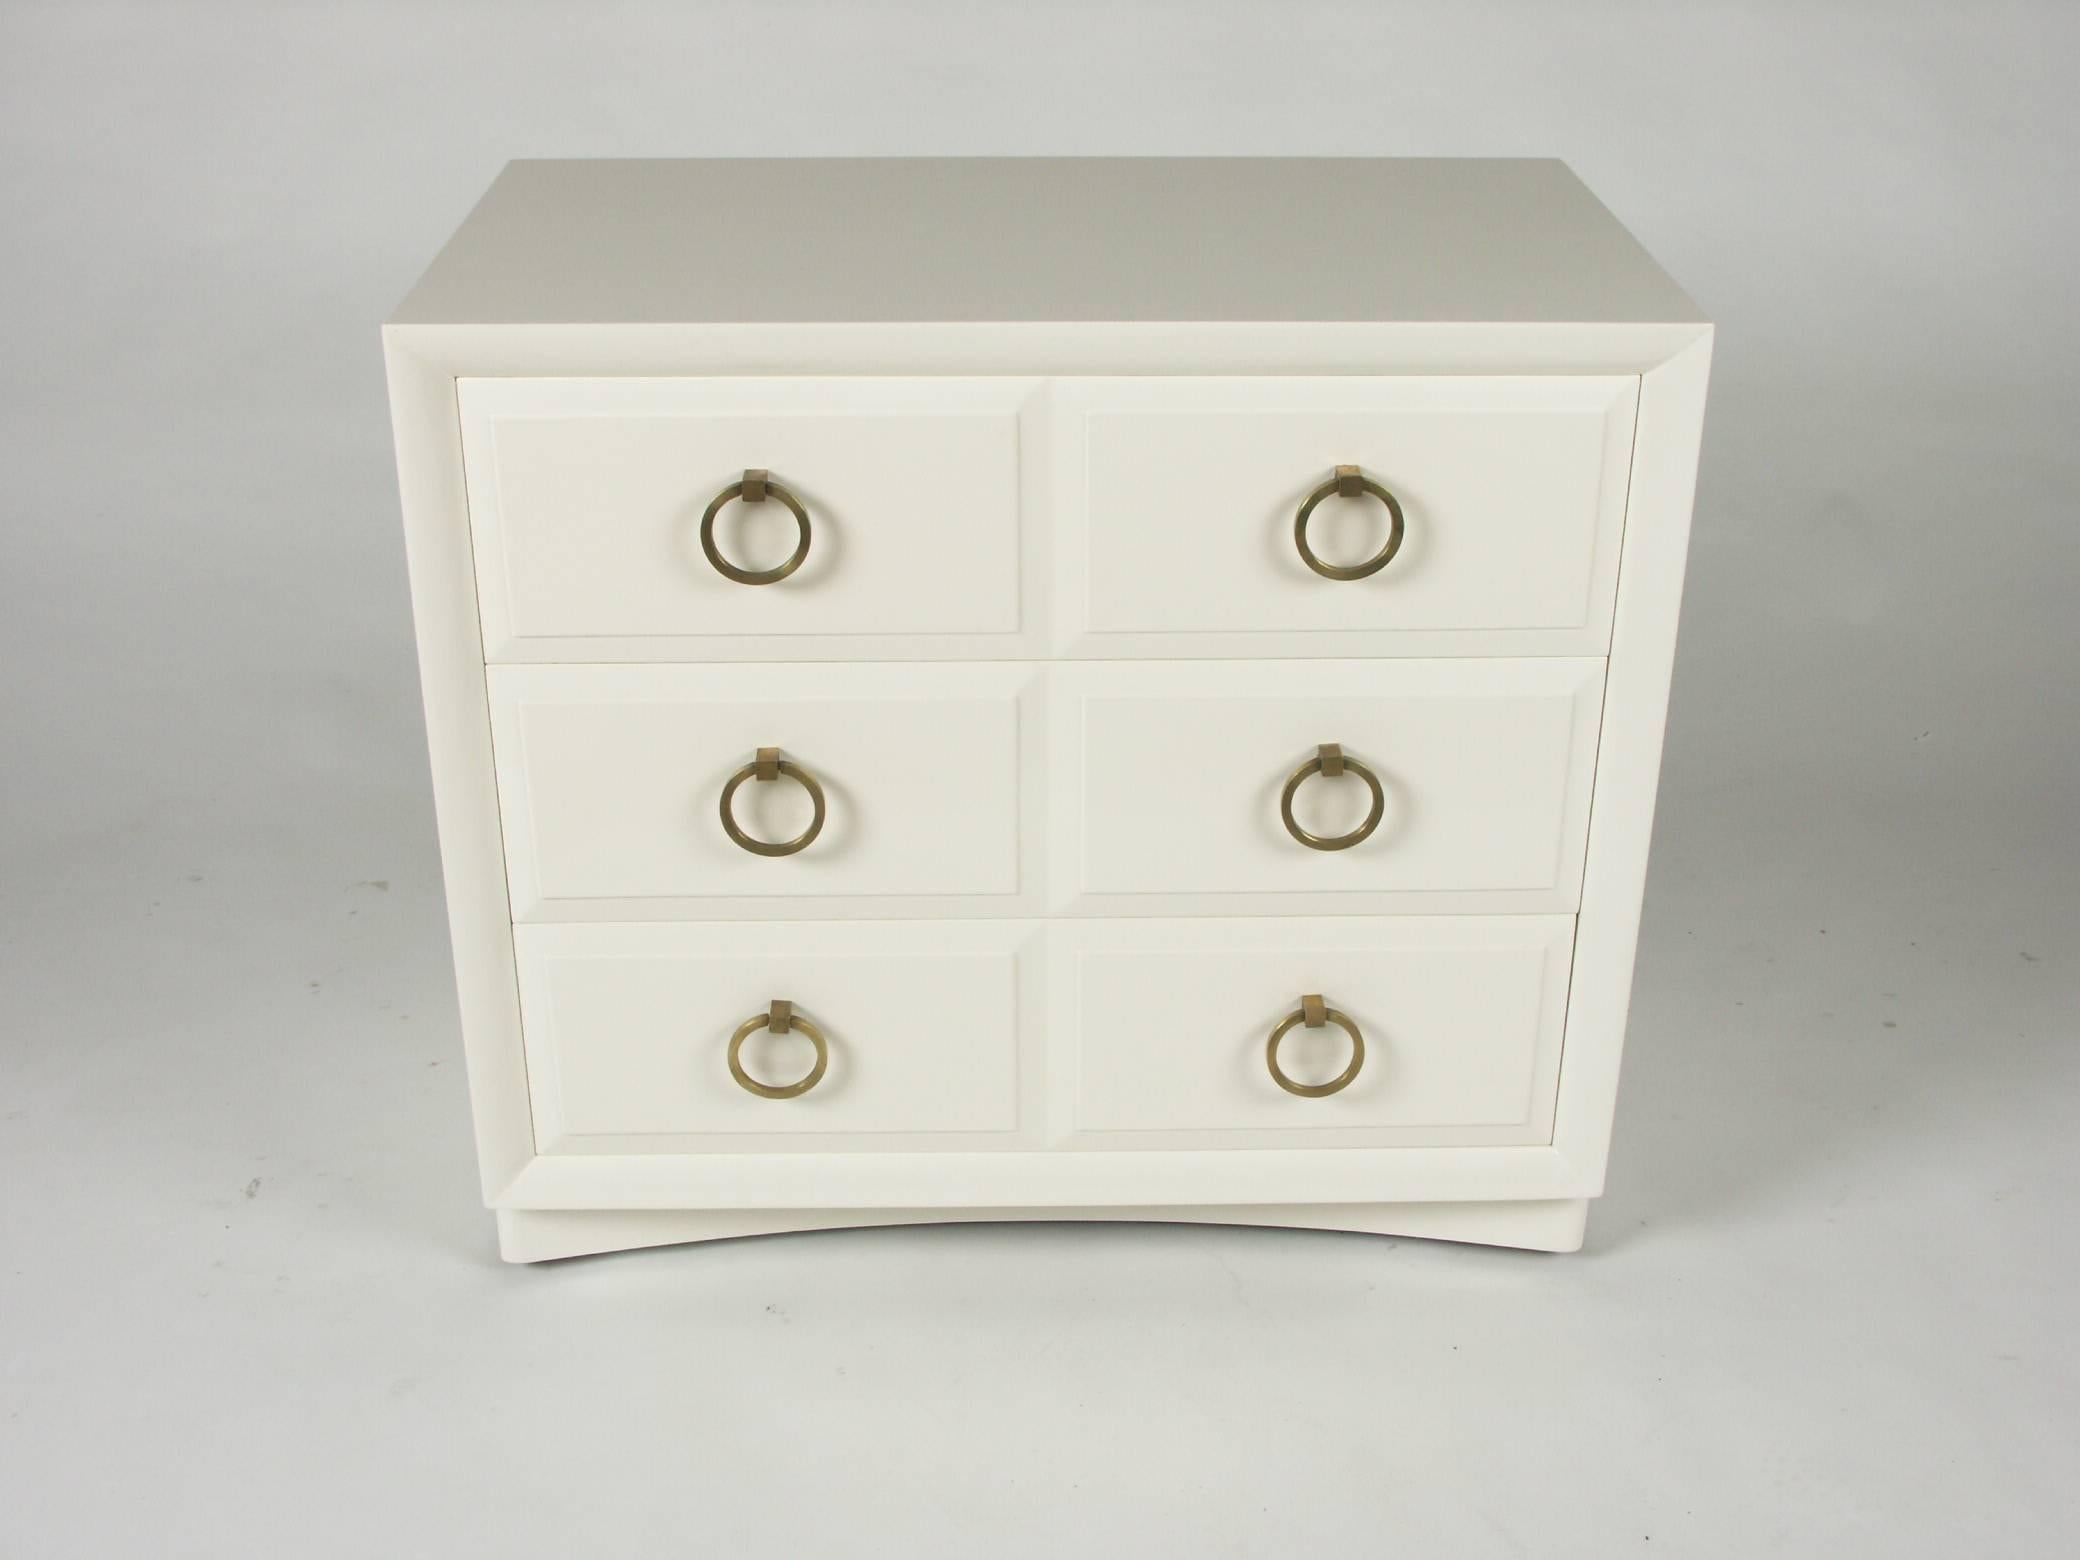 Brass ring hardware chest designed for Widdicomb, currently being refinished, color or stain can be custom selected.